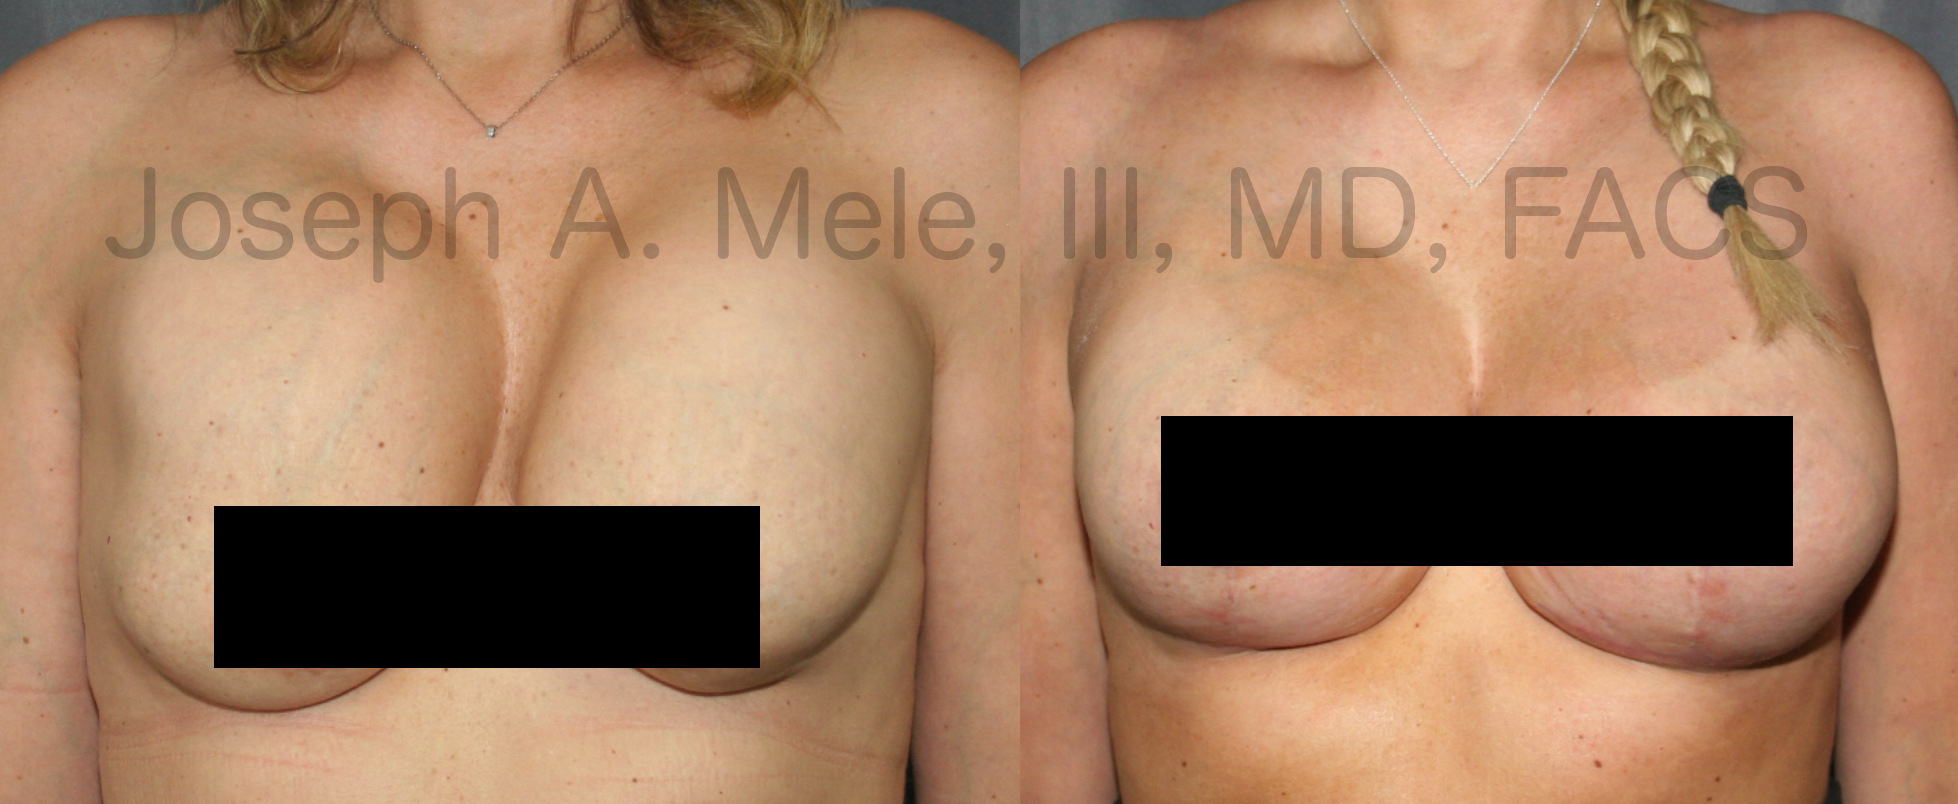 Breast Implant Revision before and after pictures Breast Augmentation Revision surgery